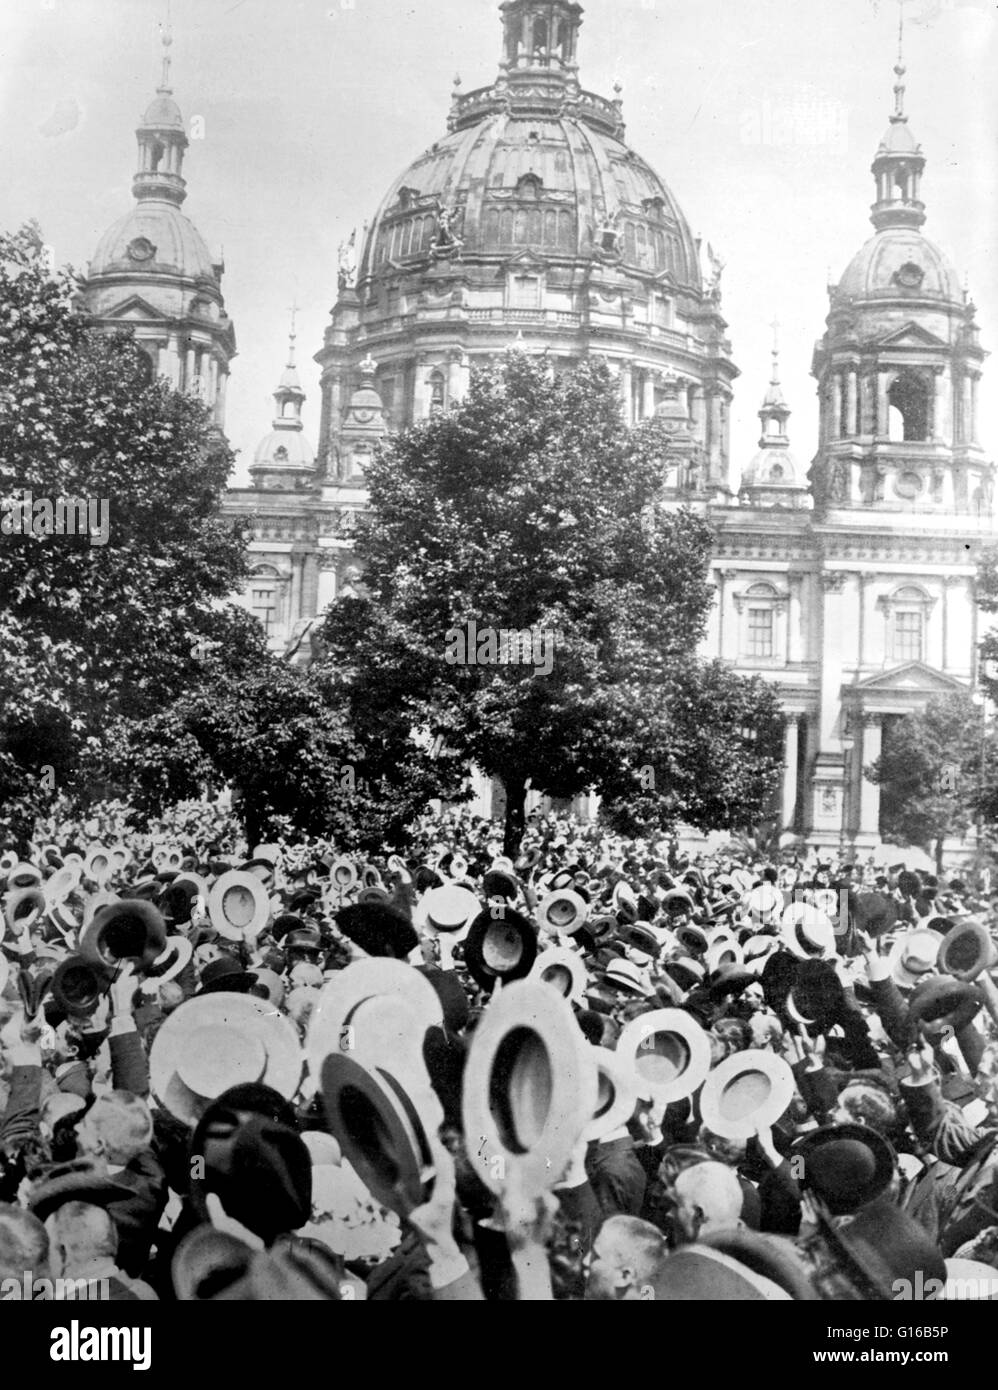 People in front of the Berlin Cathedral (Berliner Dom) in Berlin, Germany, cheering the declaration of World War I. The Spirit of 1914 refers to the alleged jubilation in Germany at the outbreak of World War I. Many individuals remembered that euphoria er Stock Photo